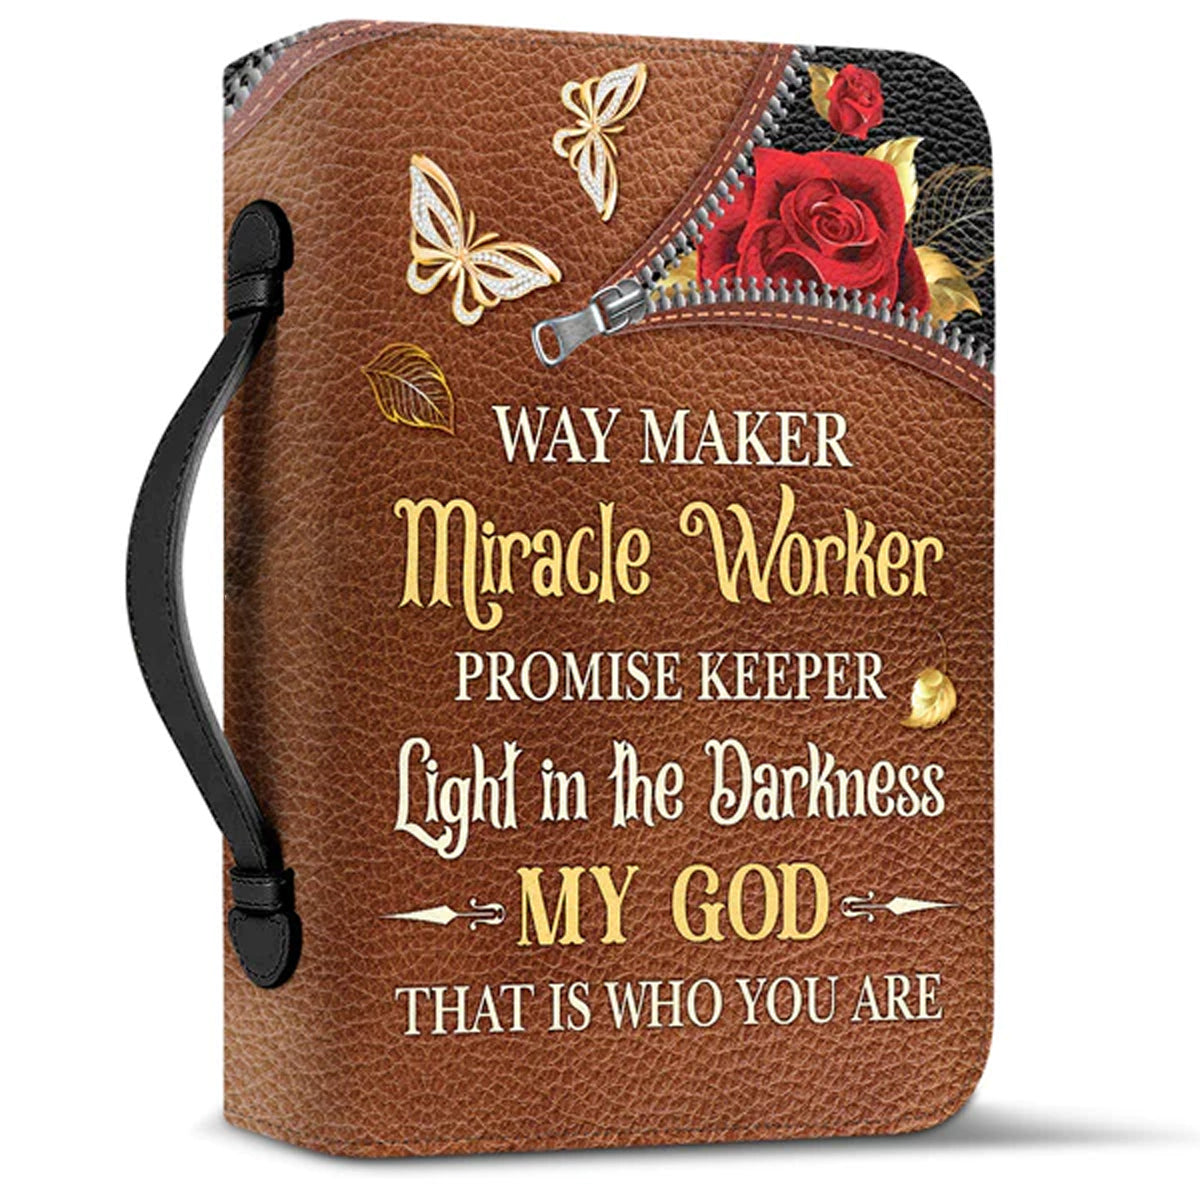 Christianart Bible Cover, Way Maker Miracle Worker Butterfly Zipper Style, Personalized Gifts for Pastor, Gifts For Women, Gifts For Men. - Christian Art Bag